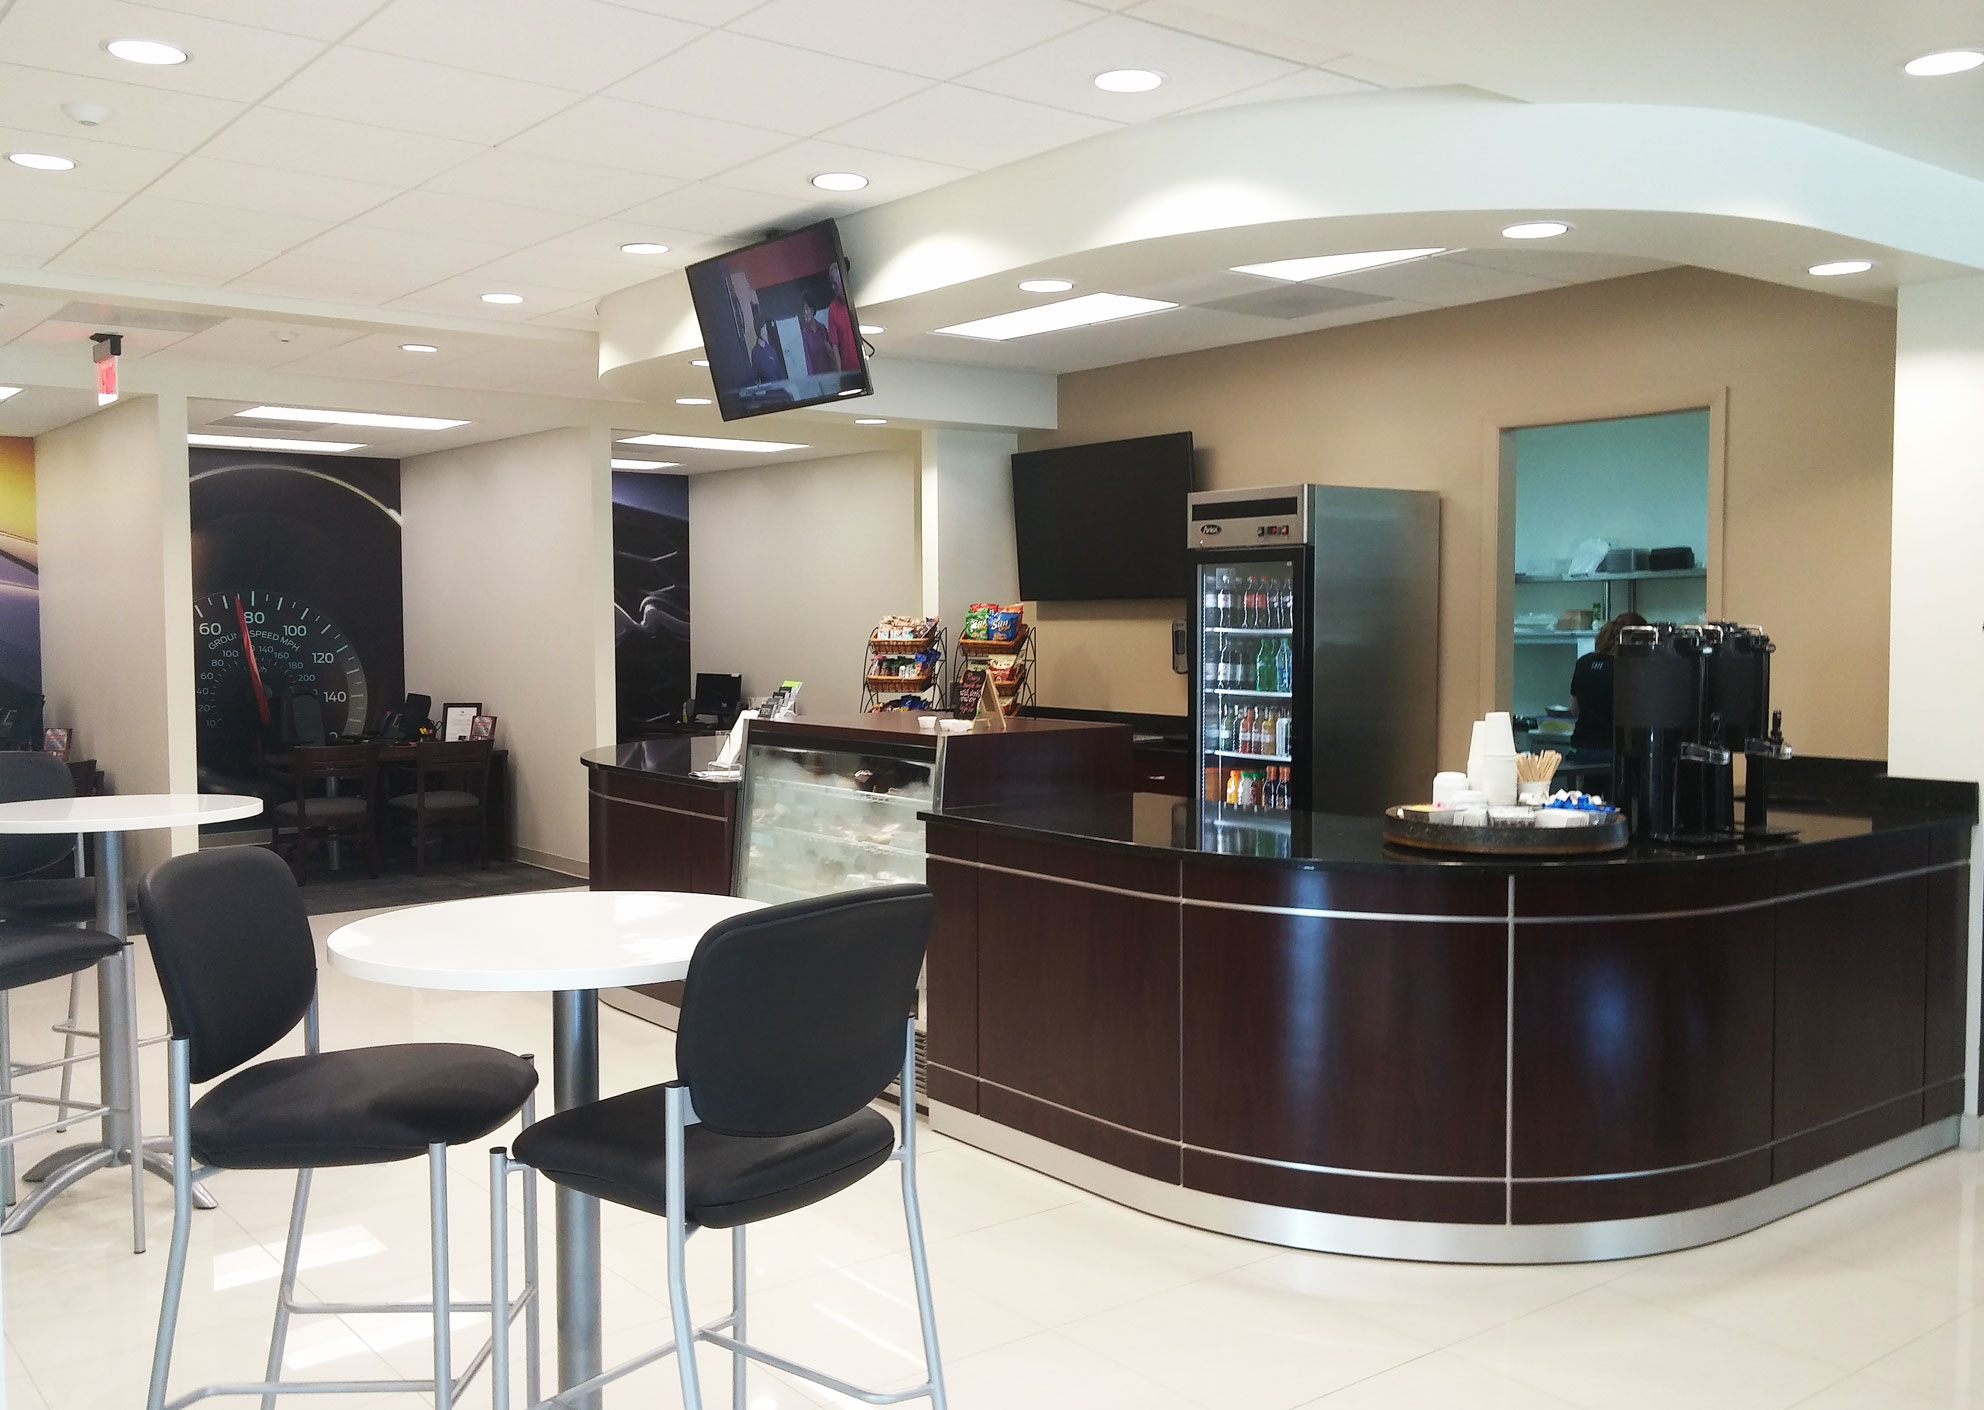 Looking for a snack, light meal or sweet treat while you're at Lakeland Automall? FRESCOS Cafe is your perfect spot! Open from early in the morning until later in the evening, the all new FRESCOS Cafe is the perfect spot to recharge while you're at Lakeland Automall.